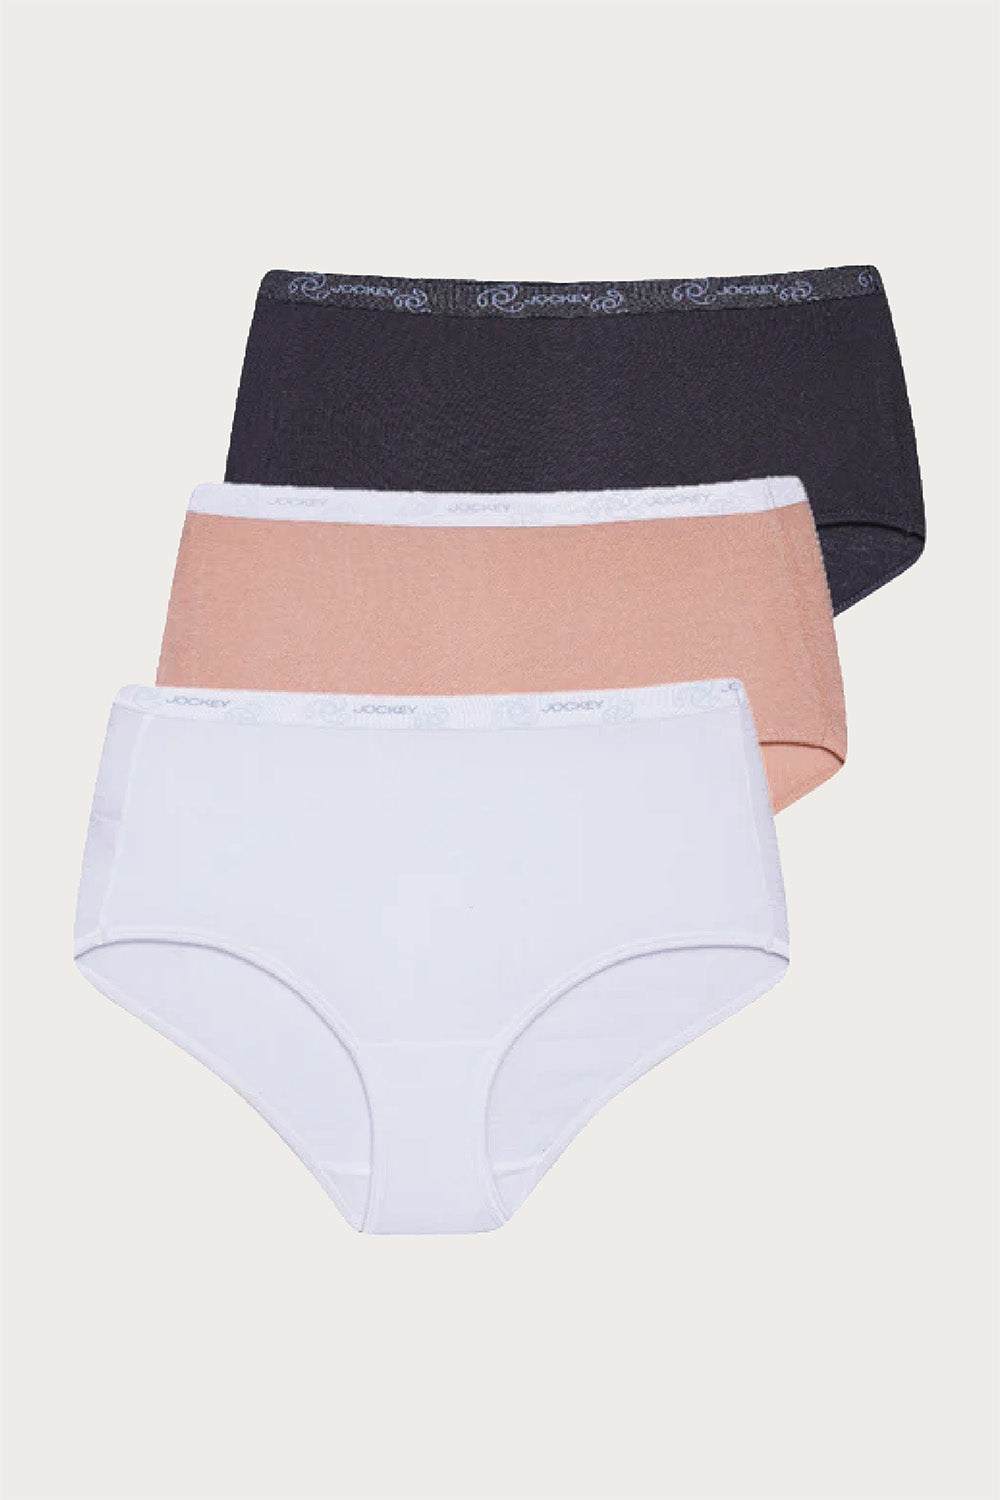 Jockey Women's Panties (Pack of 3), Color: Multicolored, Size: XL : Buy  Online at Best Price in KSA - Souq is now : Fashion